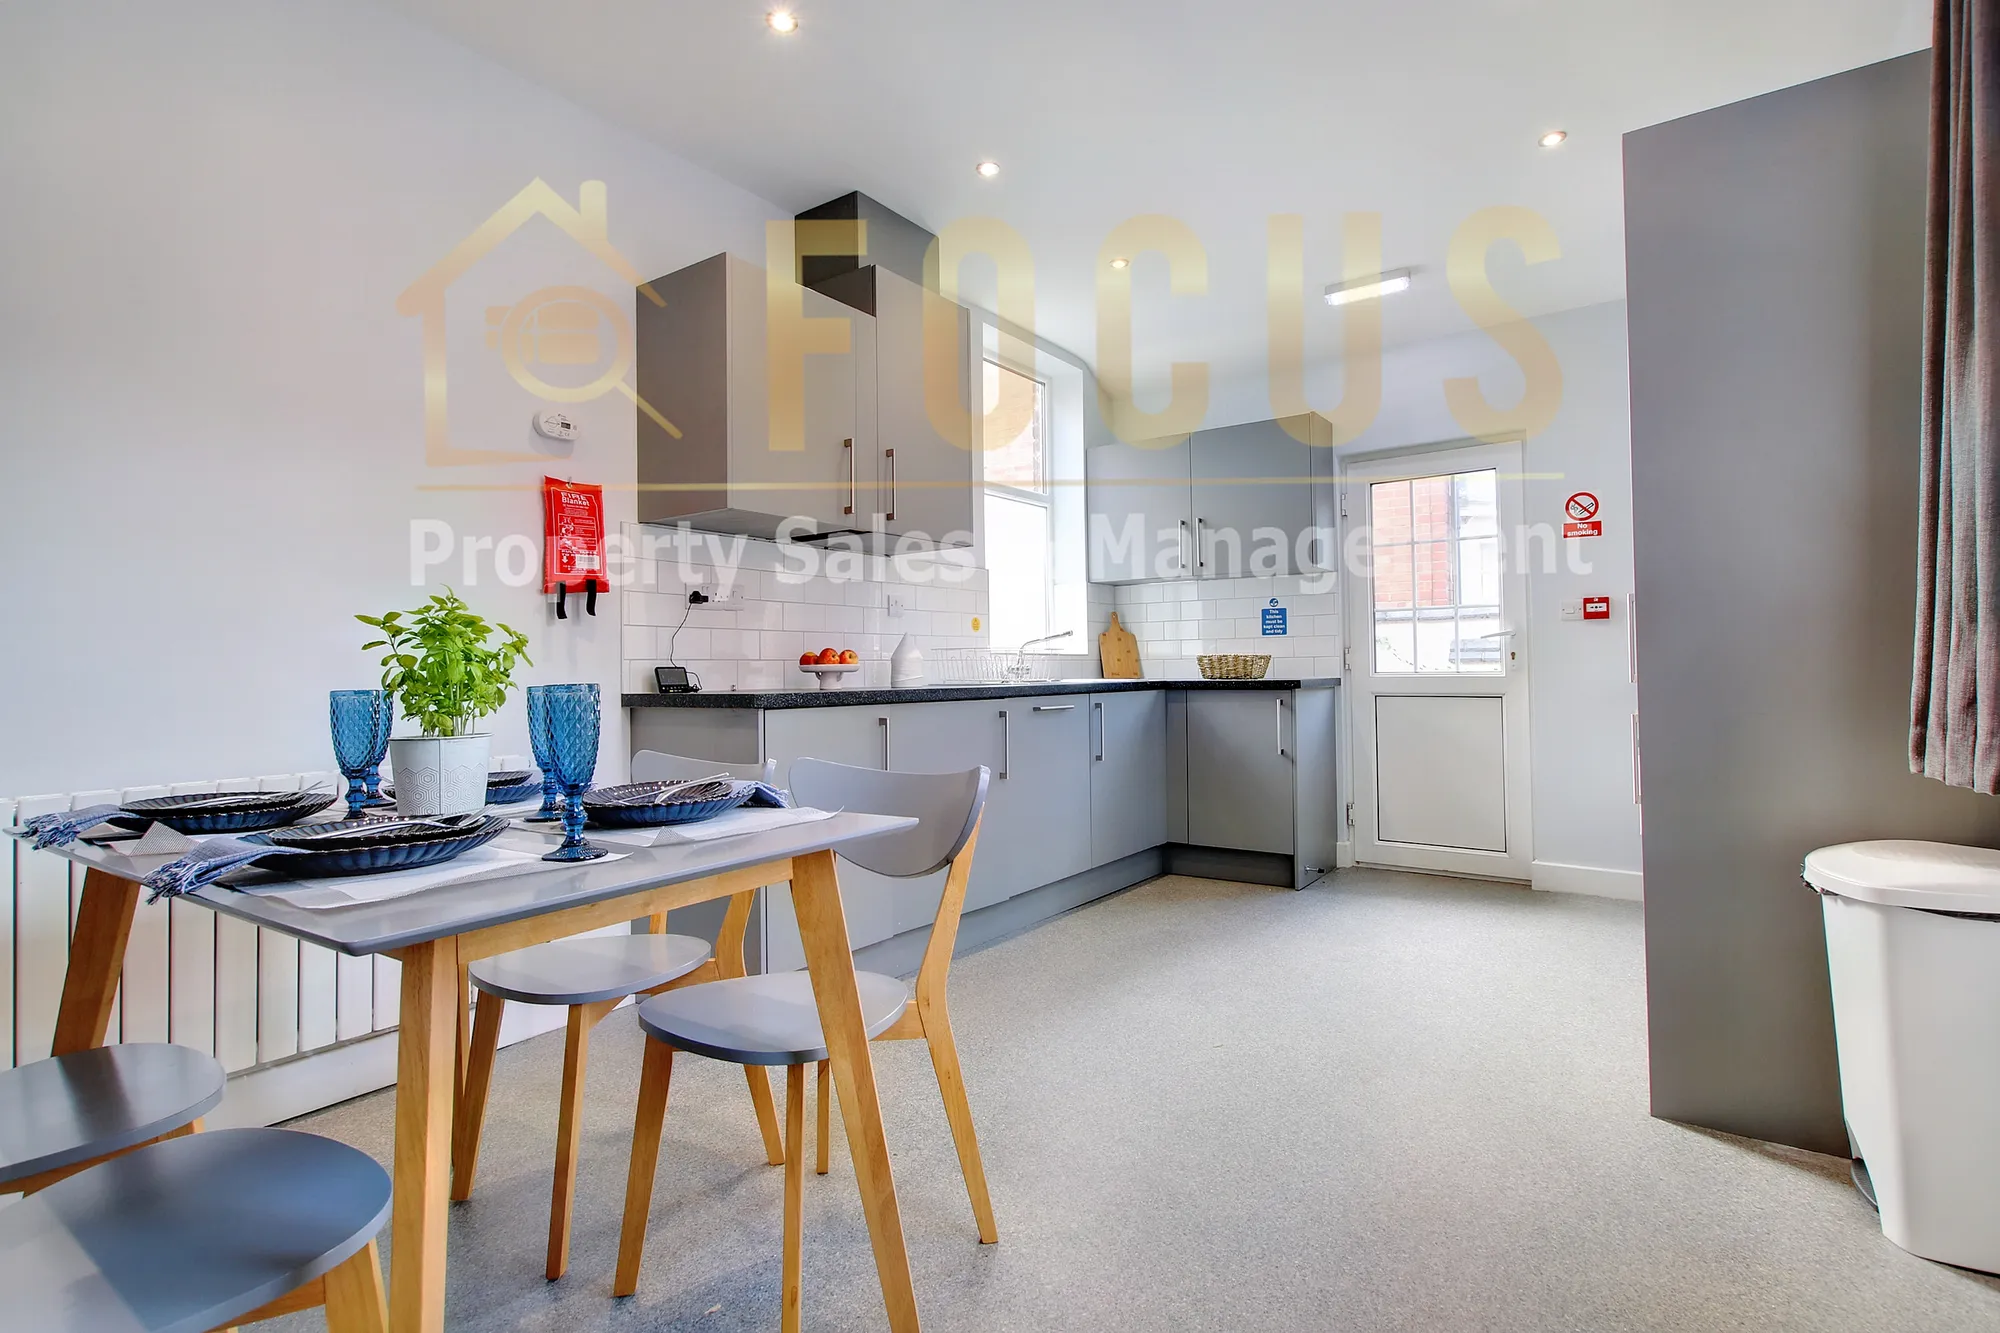 4 bed end of terrace house to rent in St. Leonards Road, Leicester - Property Image 1